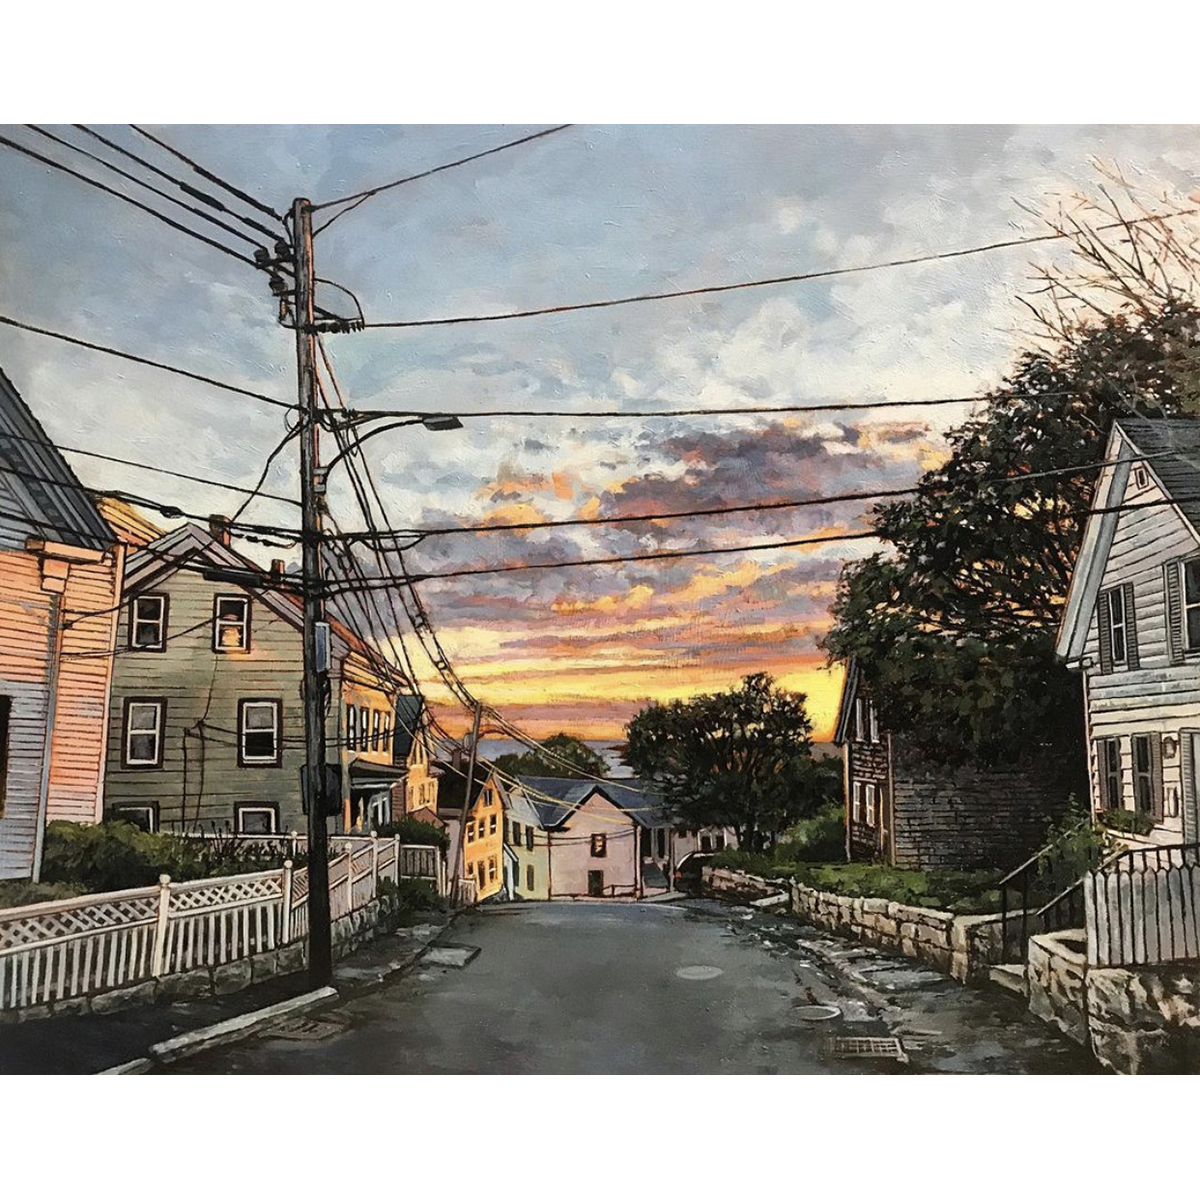 Andrew Houle &quot;Mt. Vernon Street - Gloucester, MA&quot; - Original Oil Painting on Wood - 16 x 20&quot;